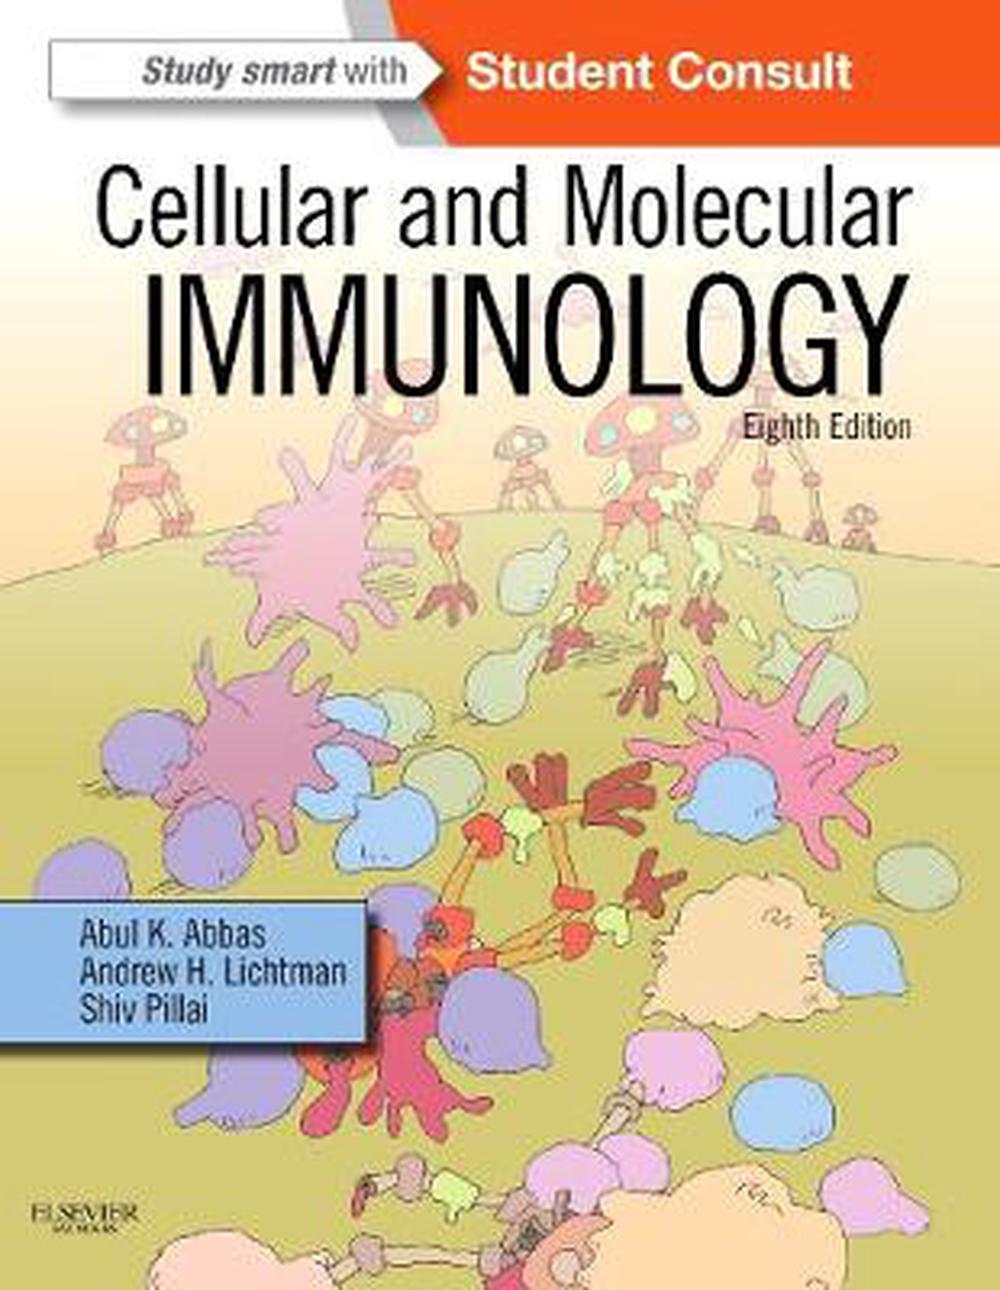 cellular and molecular immunology abbas 9th edition pdf free download